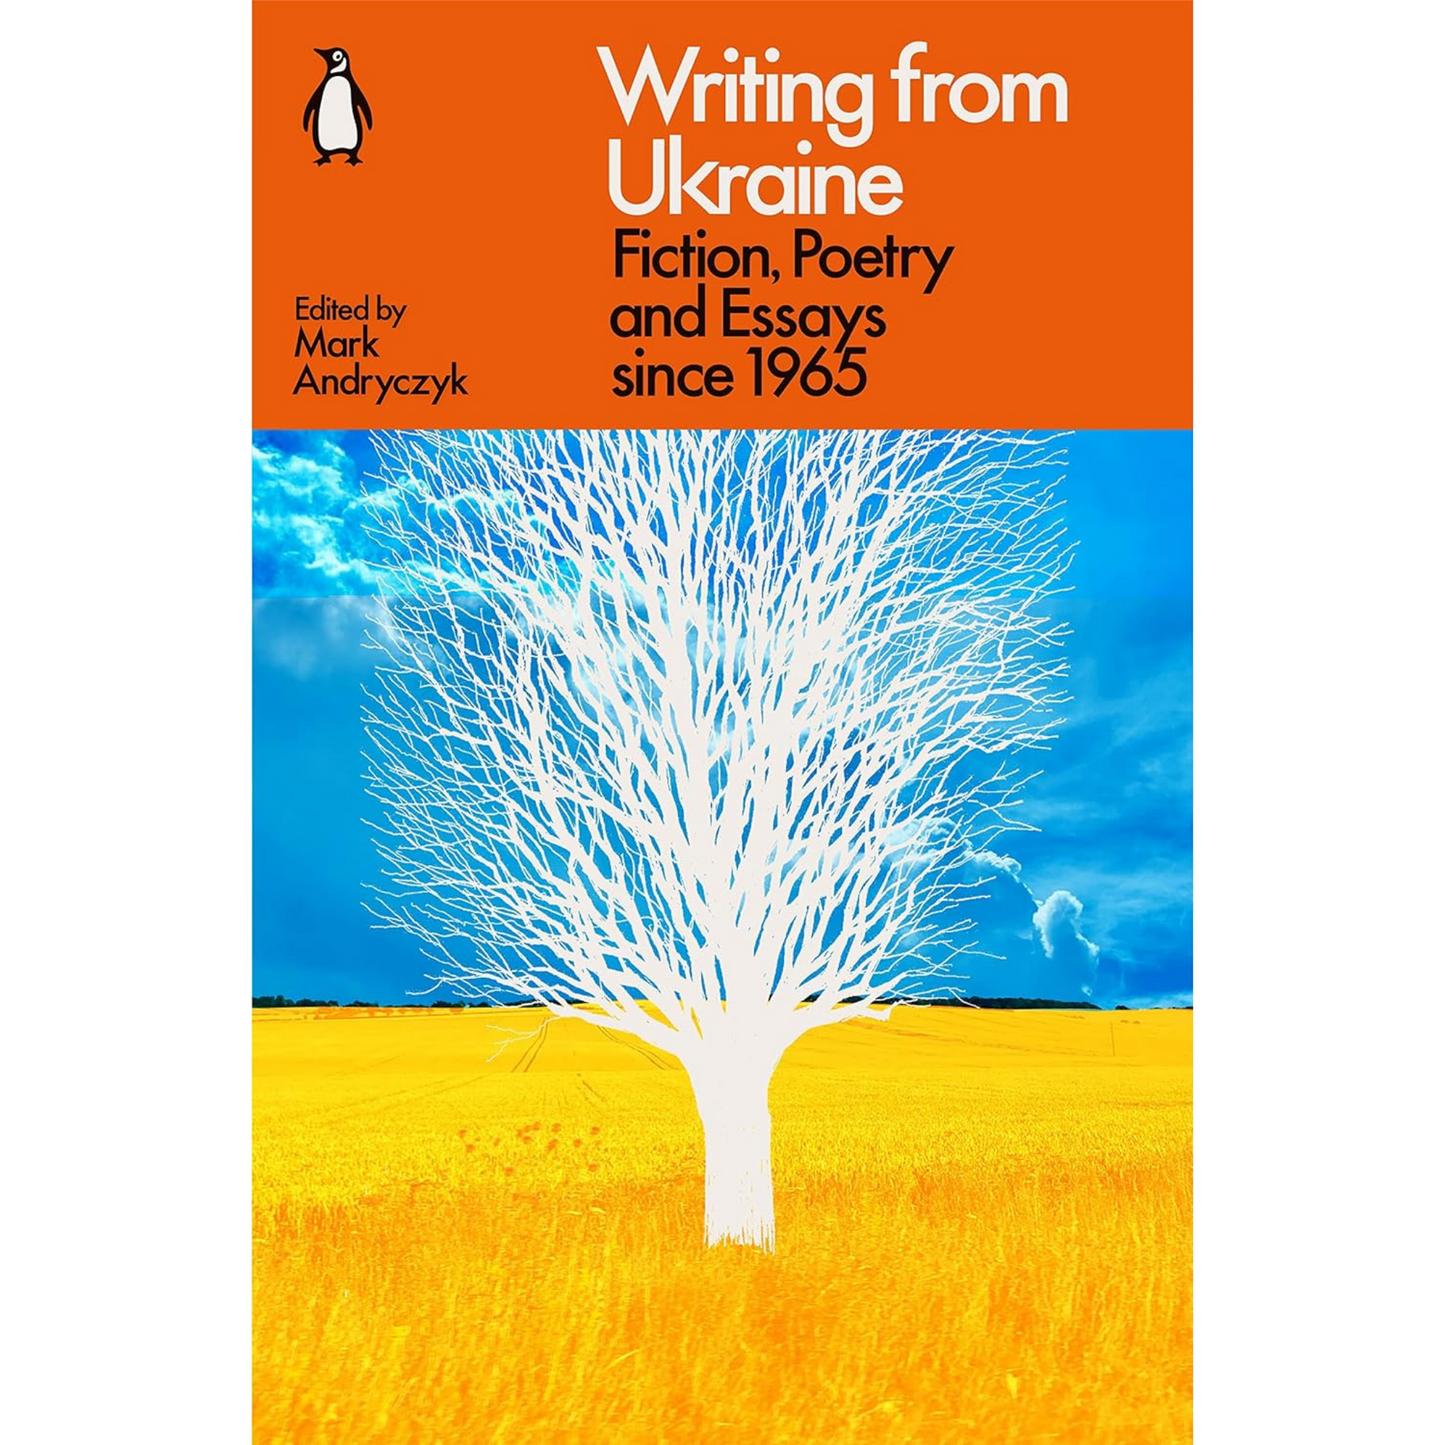 Writing from Ukraine: Fiction, Poetry and Essays since 1965